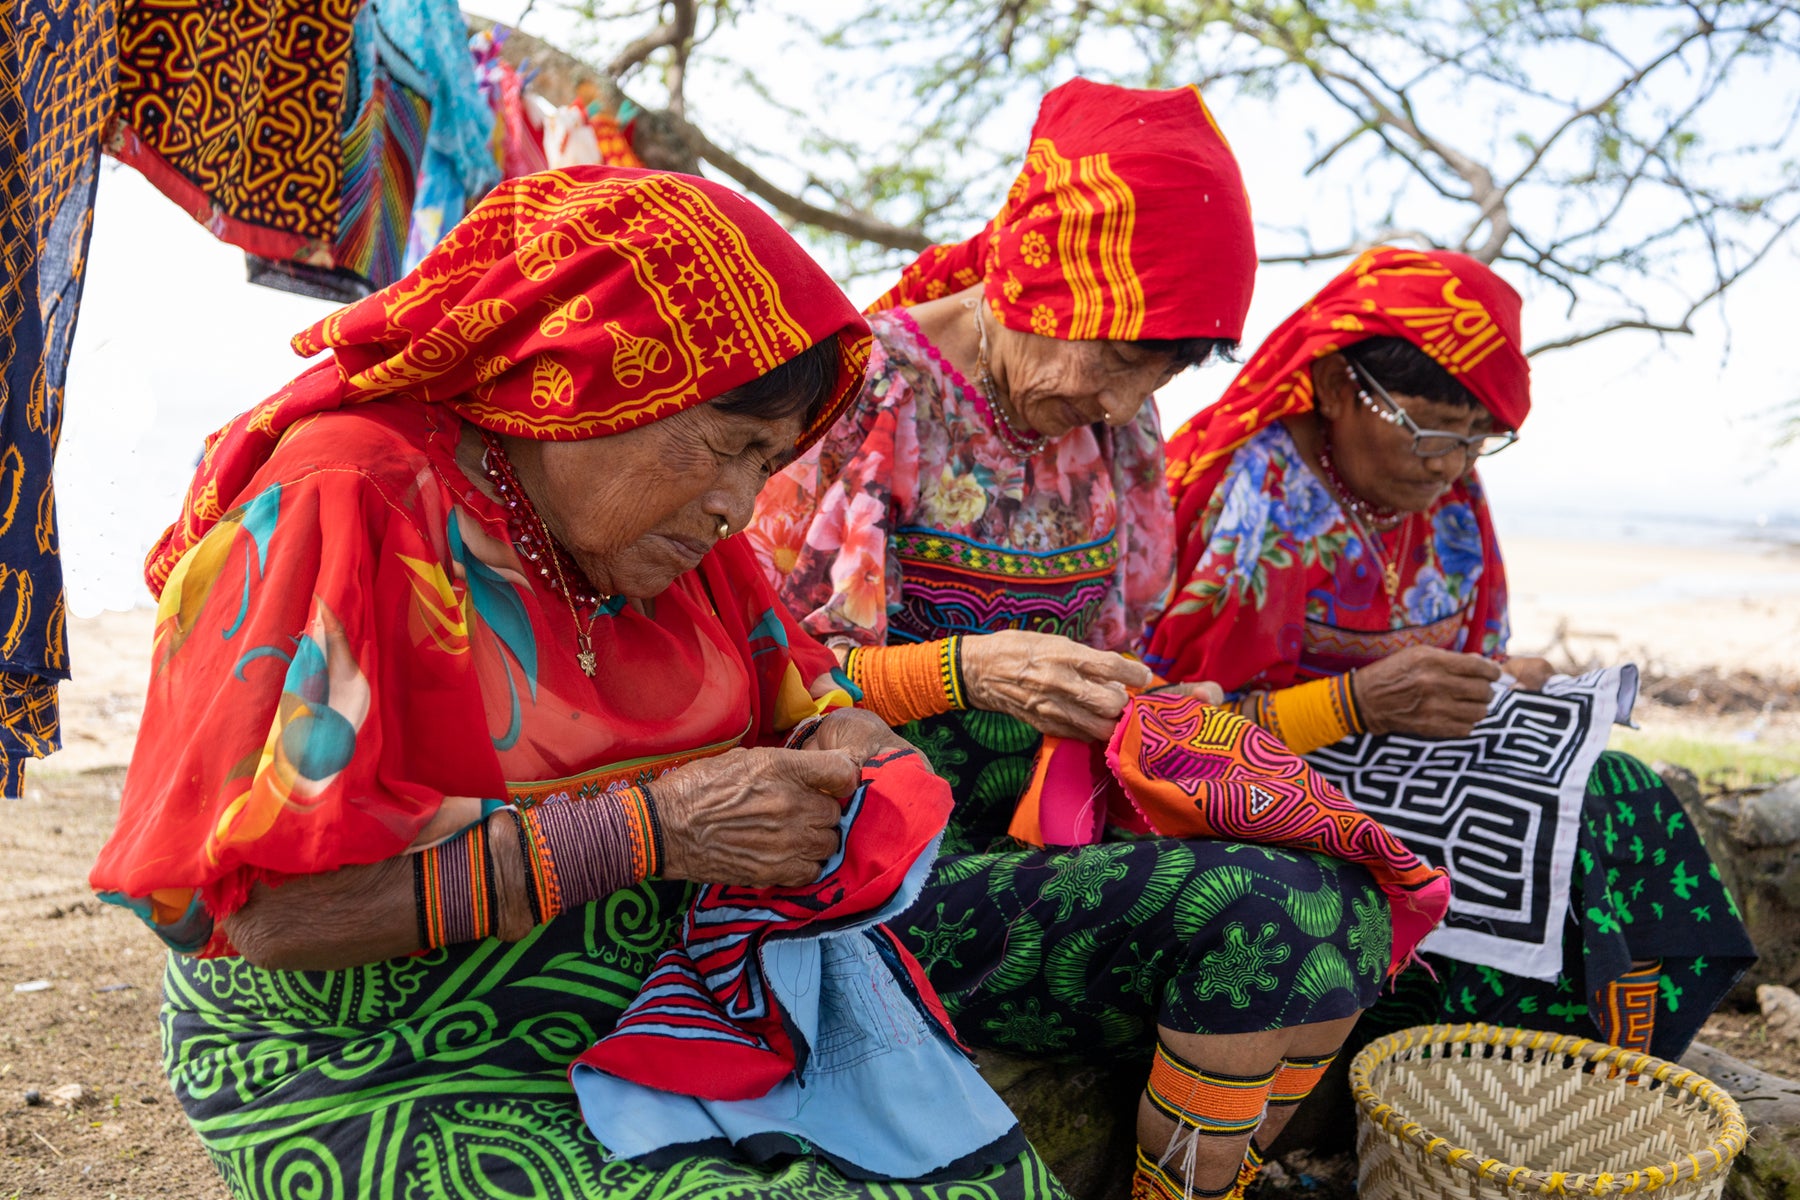 Three Kuna women skillfully sewing a vibrant mola, a traditional textile art, for sale on TraderBrock.com, where you can find unique handcrafted items.